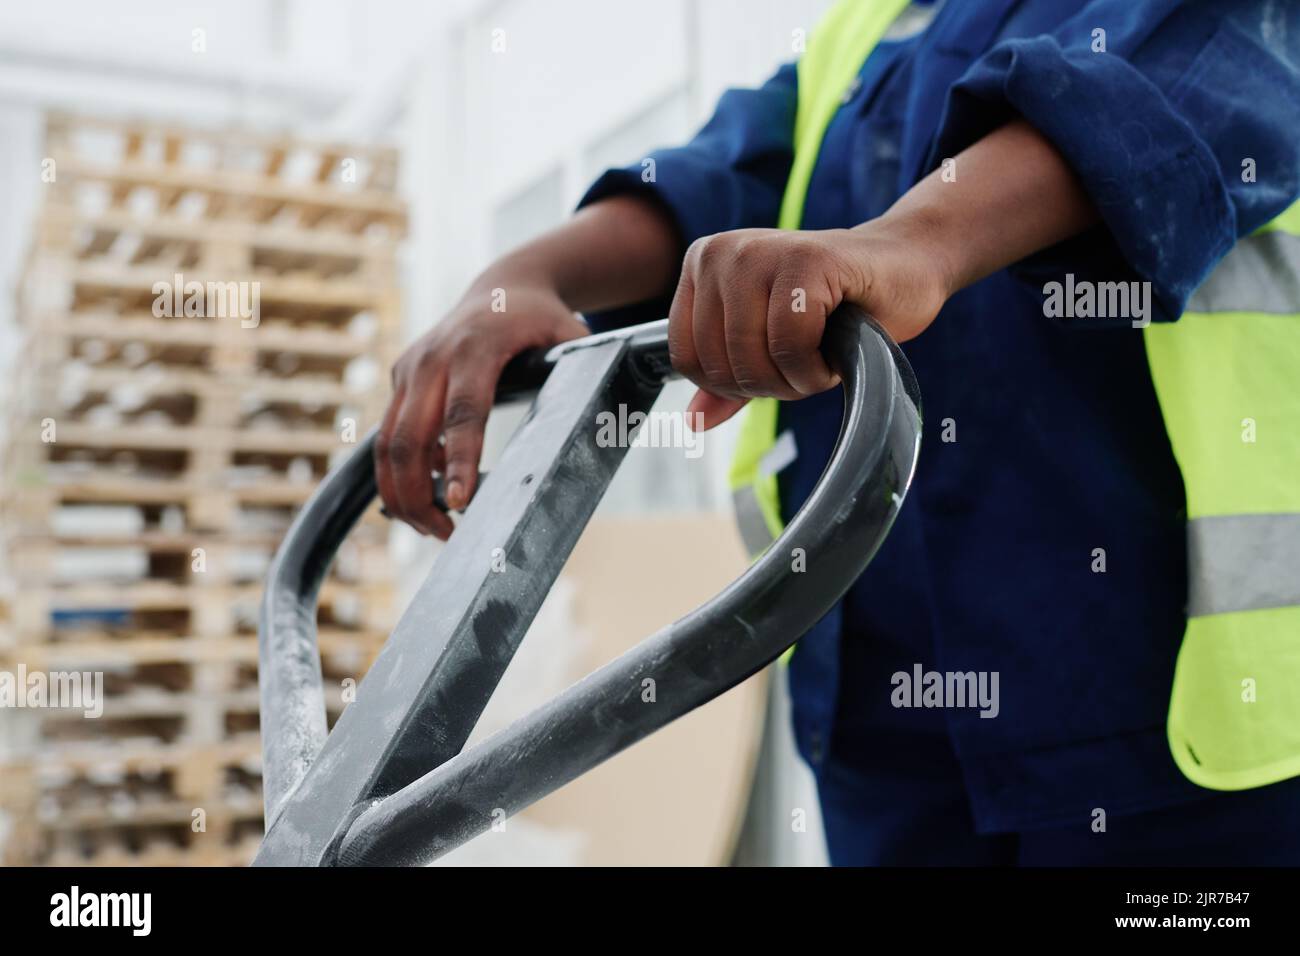 Hands of young black woman in uniform holding by handle of forklift loader with pallets while pushing it forwards during work Stock Photo